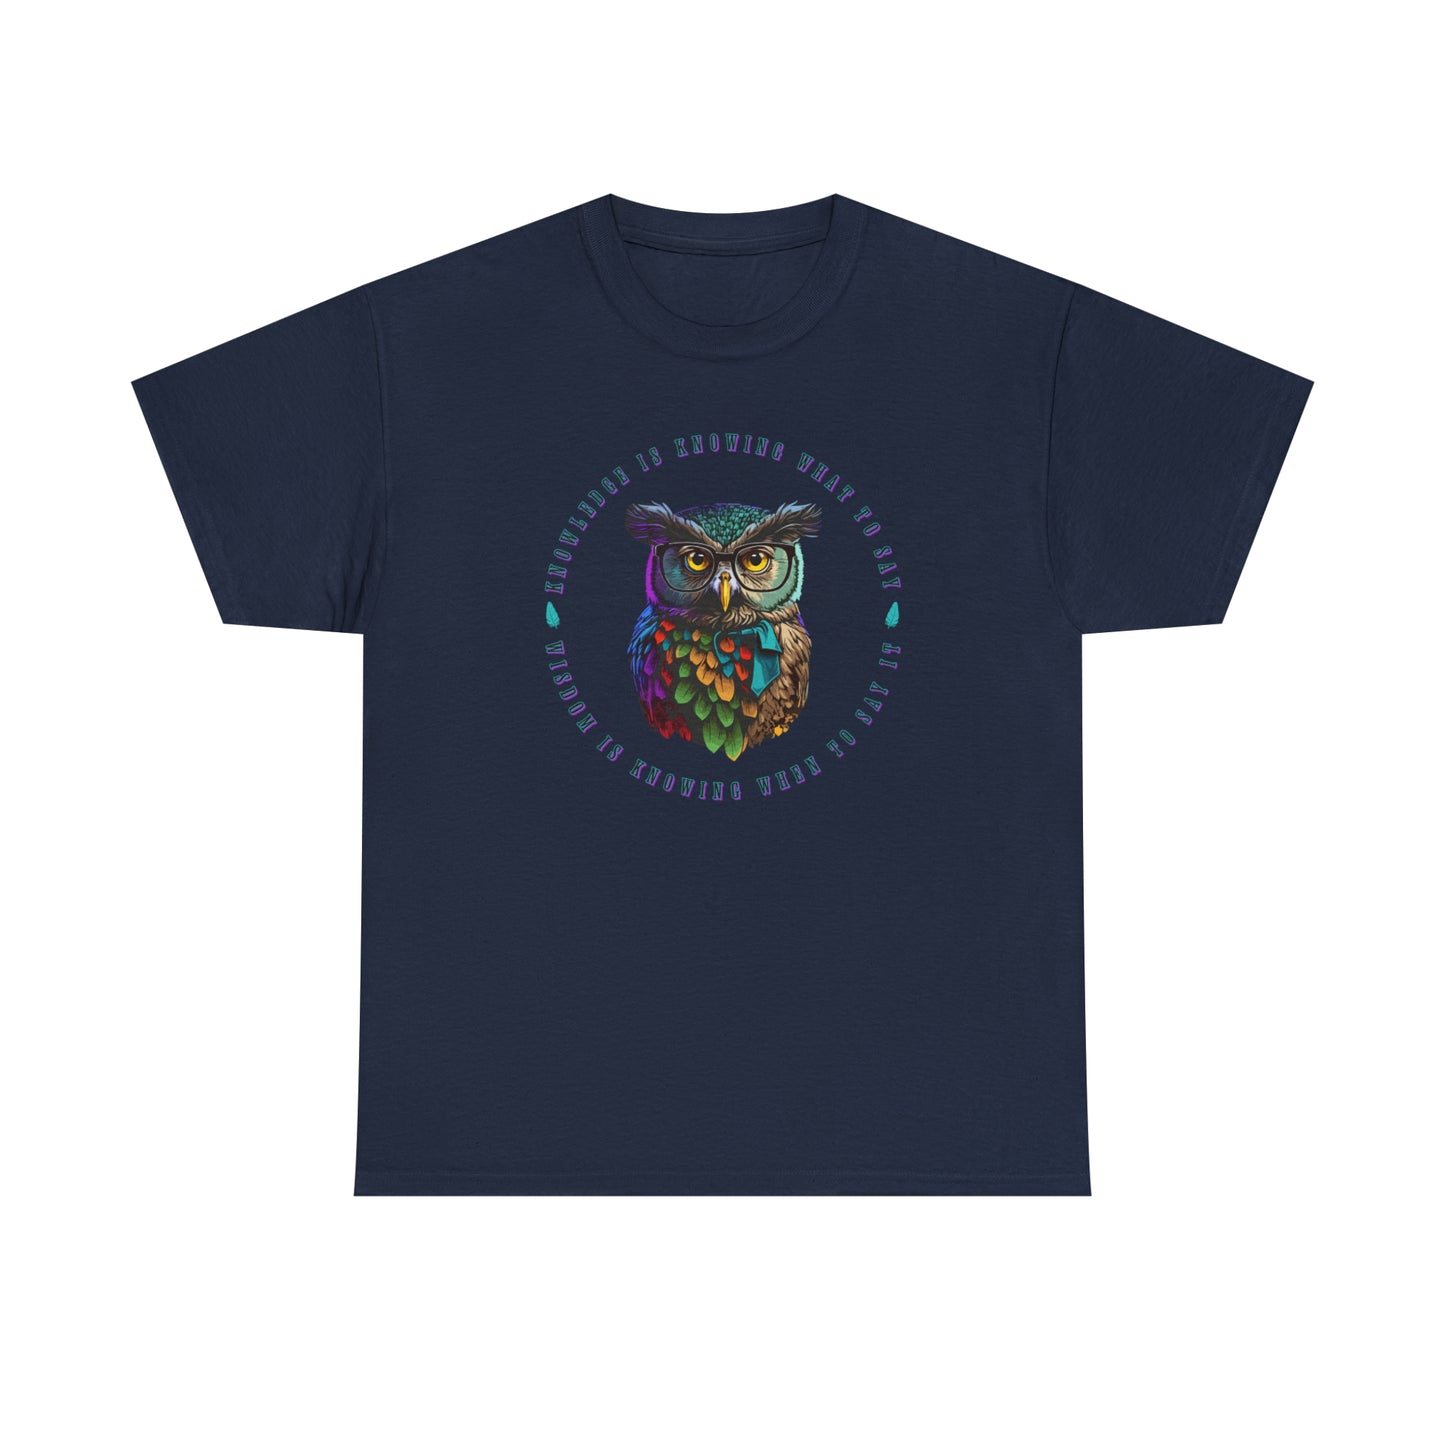 Knowledge T-Shirt For Knowing What To Say TShirt With Wise Owl T Shirt Pop Art Owl Shirt For Scholar Gift For Teacher Gift For Owl Lover Shirt For Animal Lover Shirt